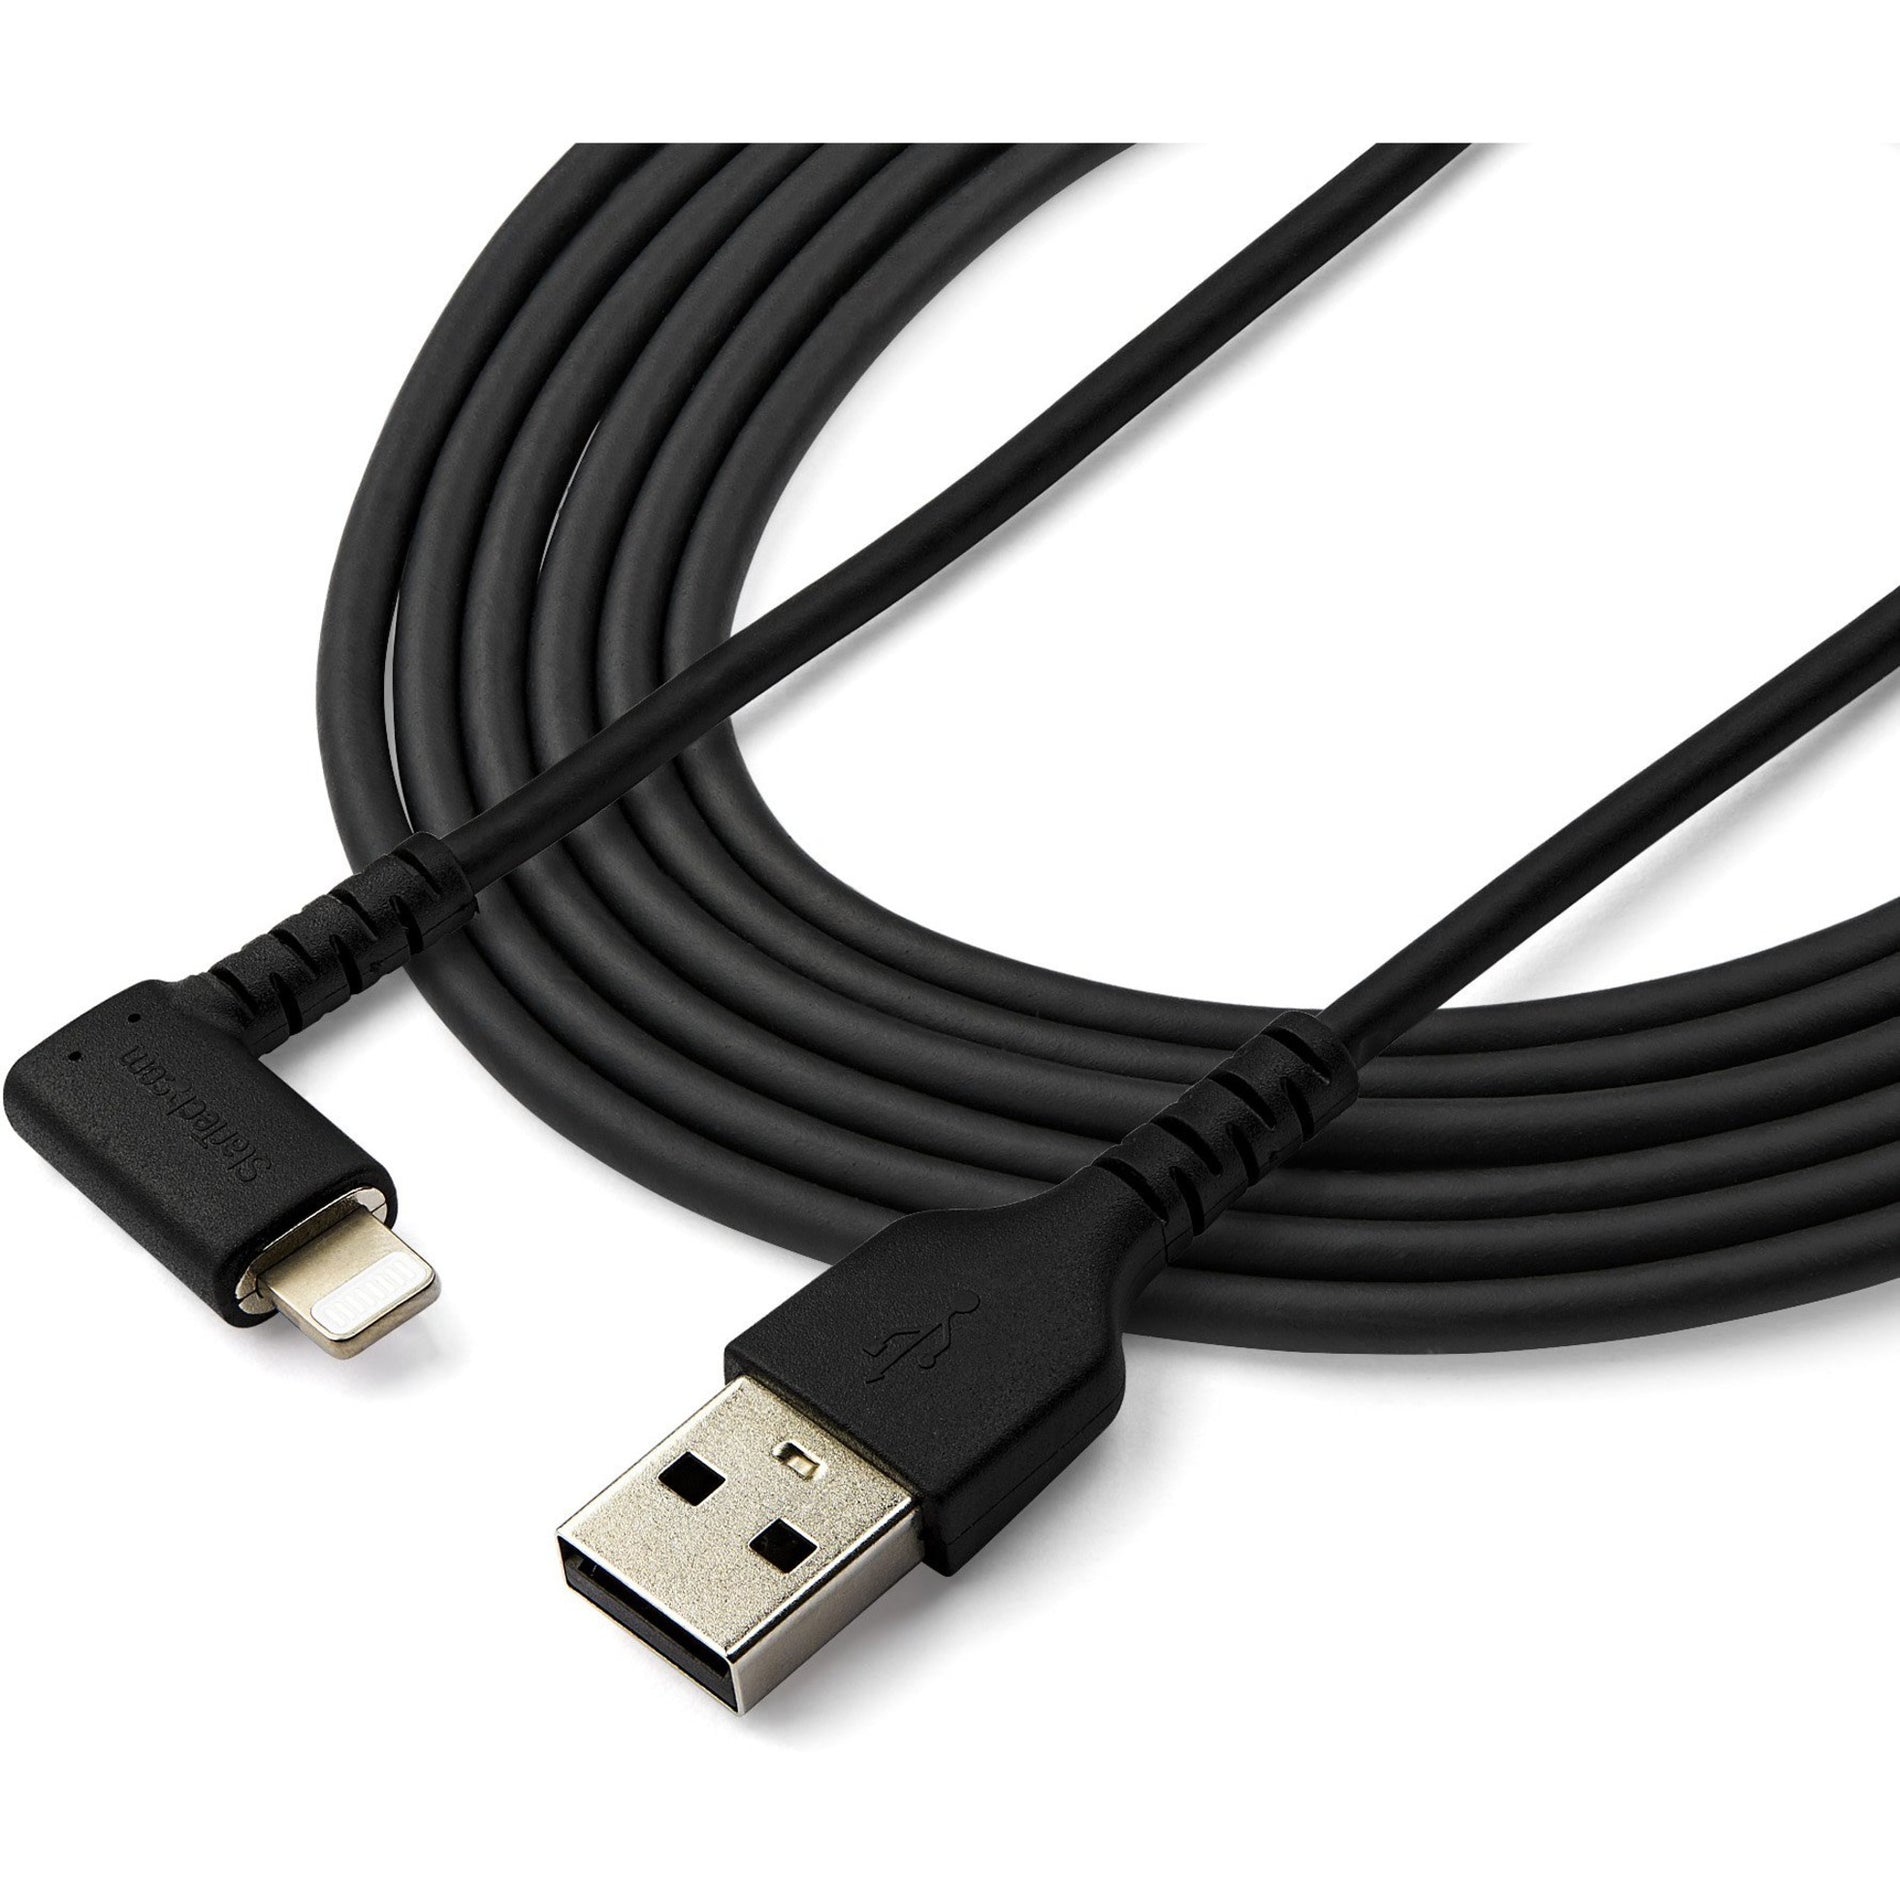 StarTech.com RUSBLTMM2MBR Lightning/USB Data Transfer Cable, 6.6Ft Heavy Duty Mfi Certified Cable, Black, USB to Lightning